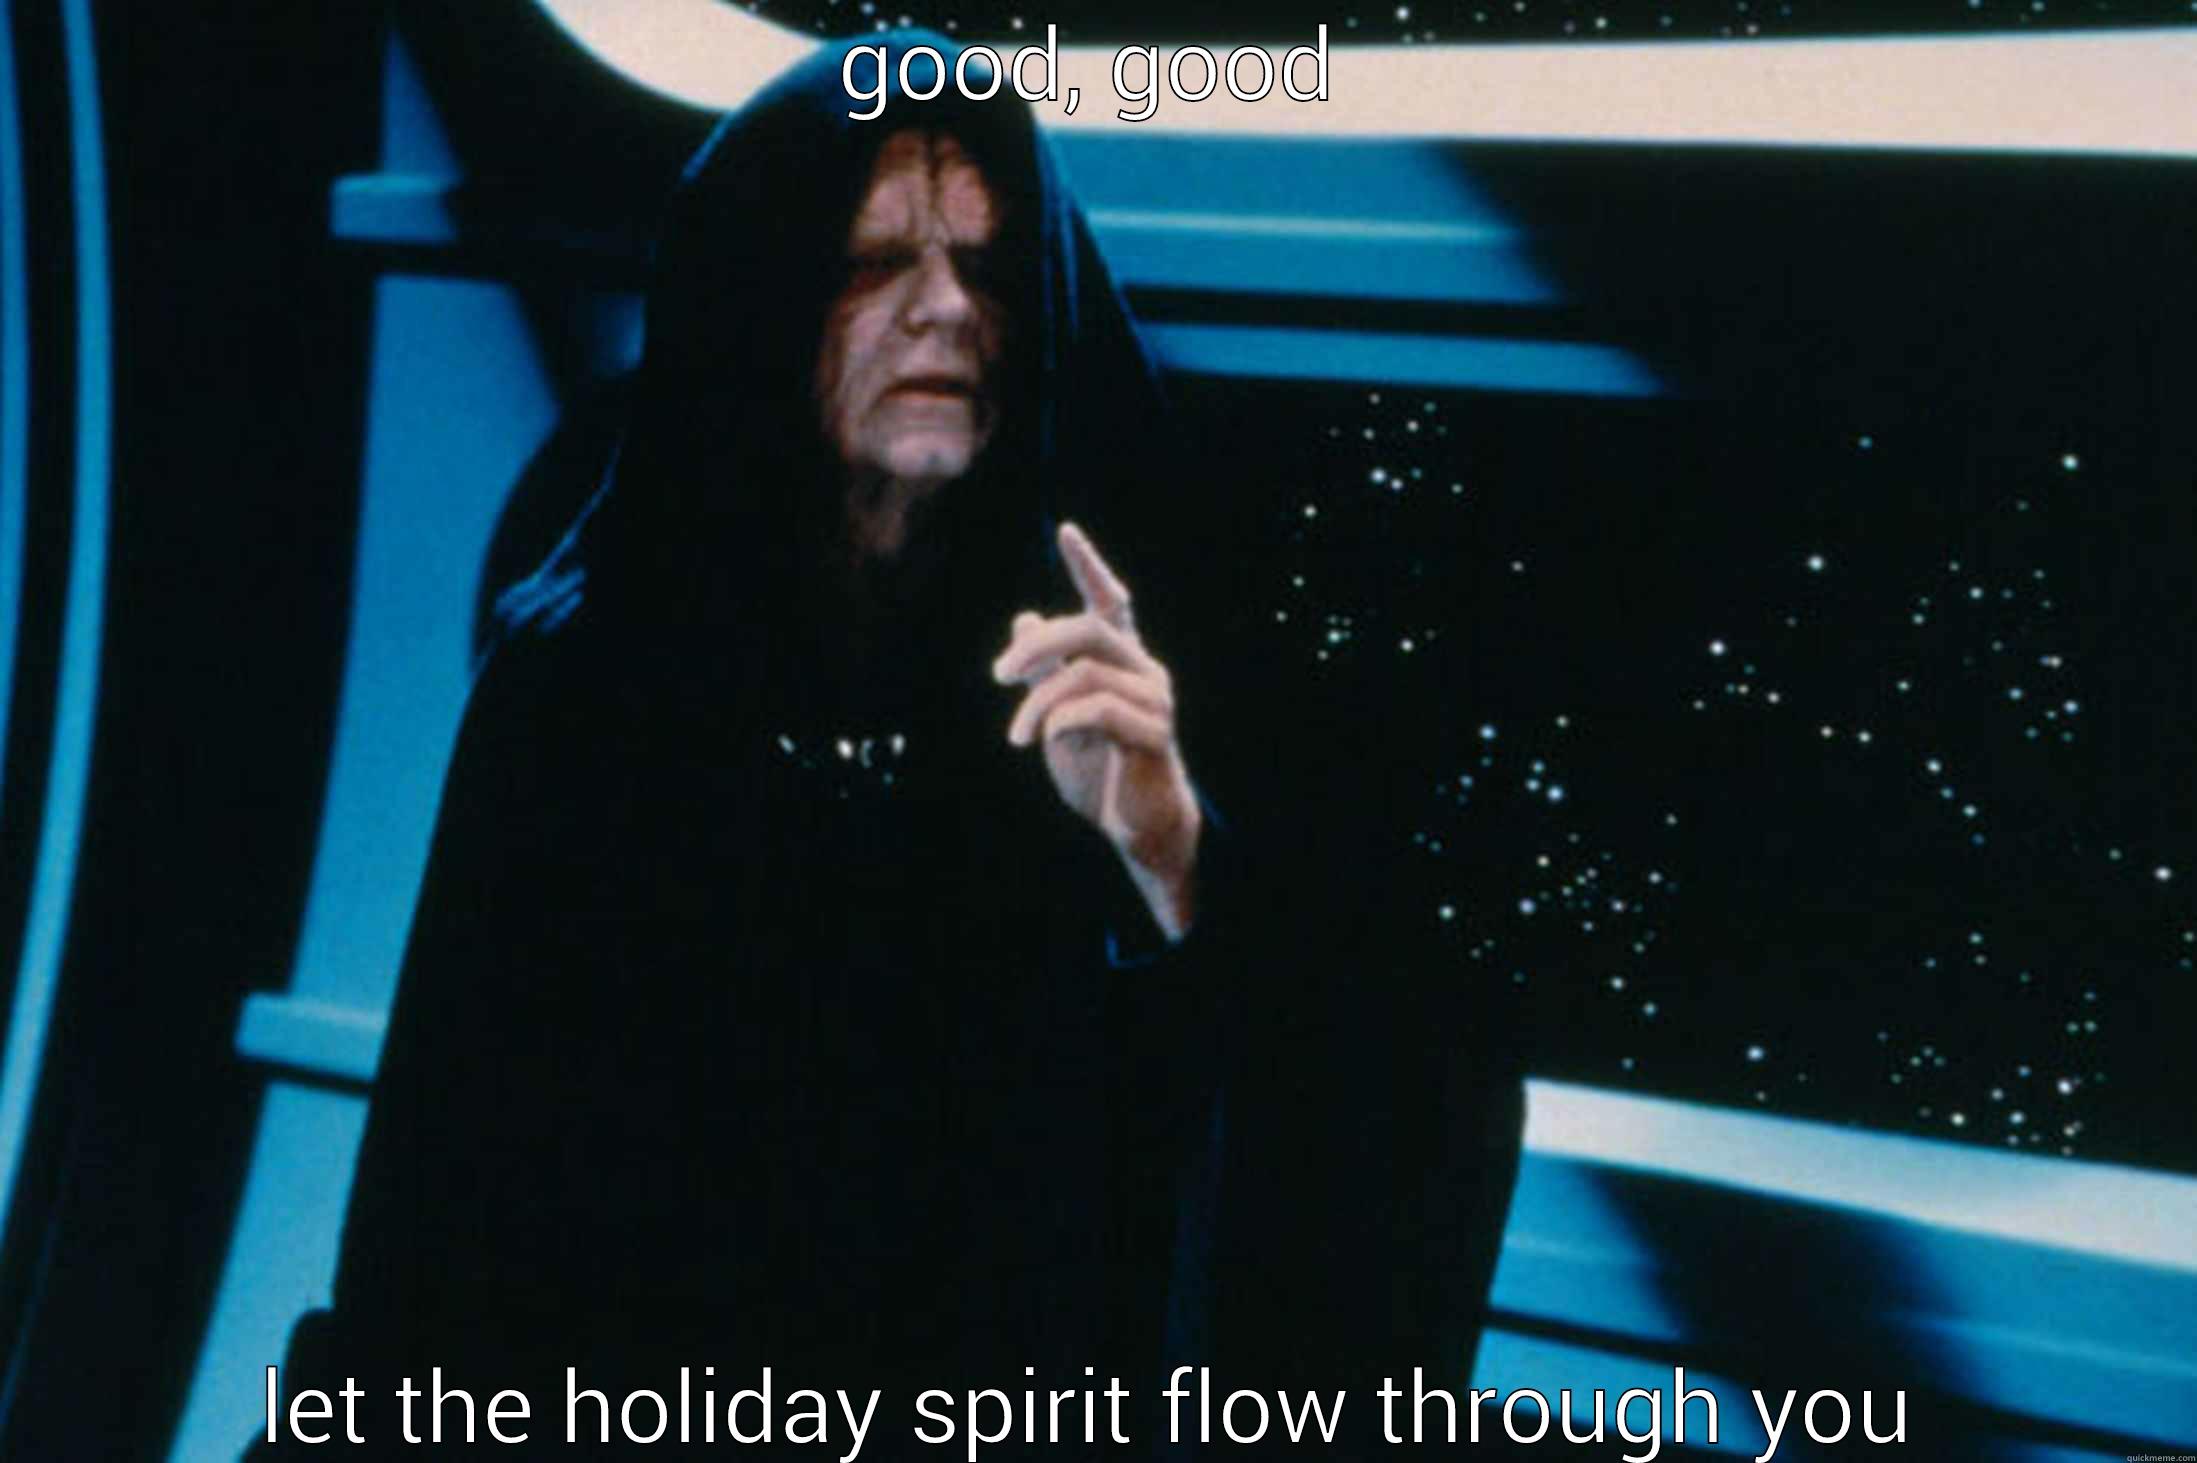 emperor holiday spirit - GOOD, GOOD LET THE HOLIDAY SPIRIT FLOW THROUGH YOU Misc